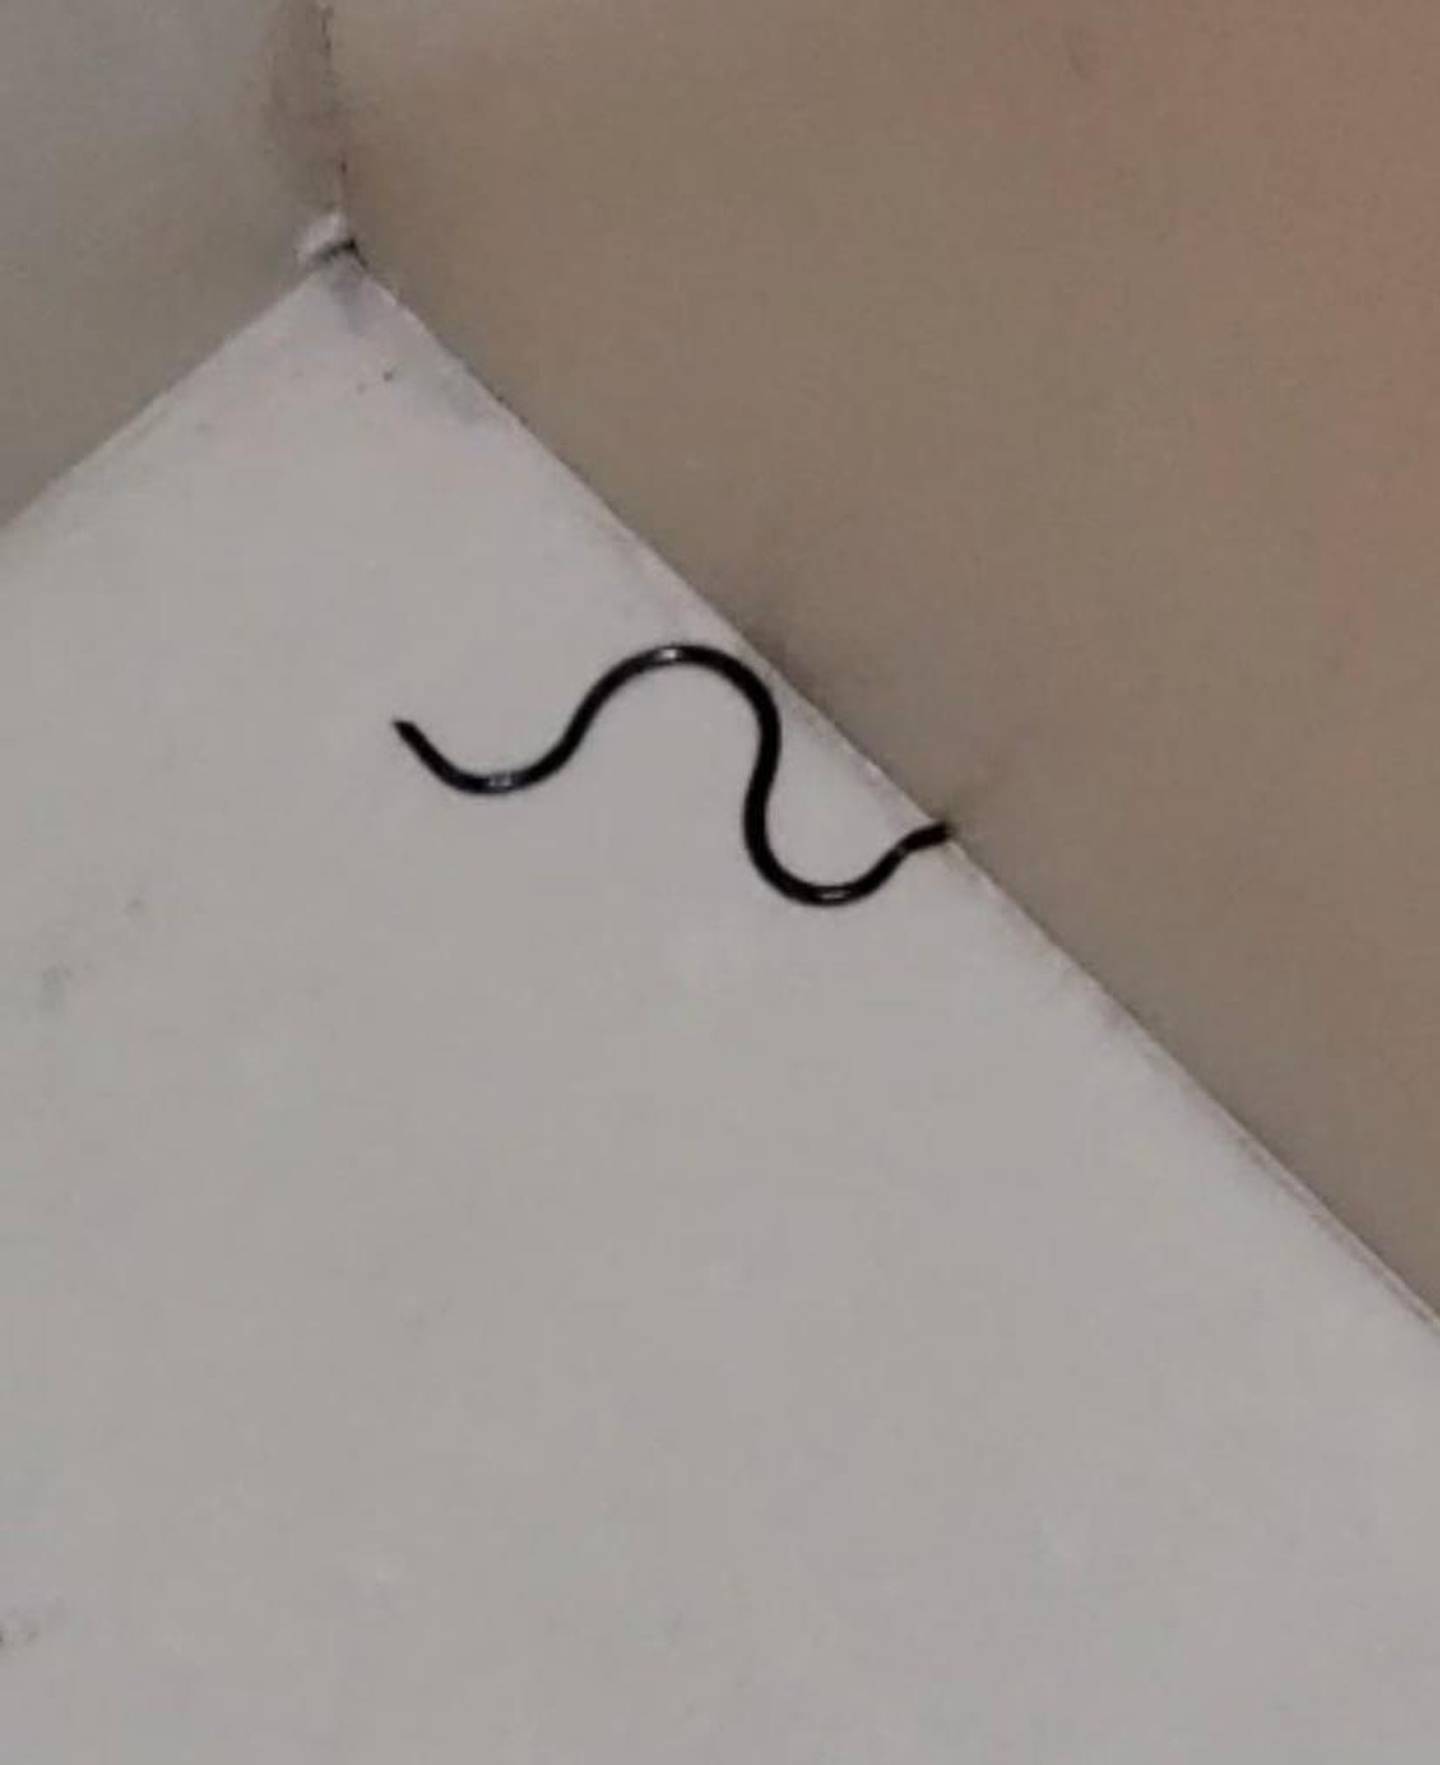 Sightings of blind snakes are common in the UAE. Courtesy: Sunil Chaudhary